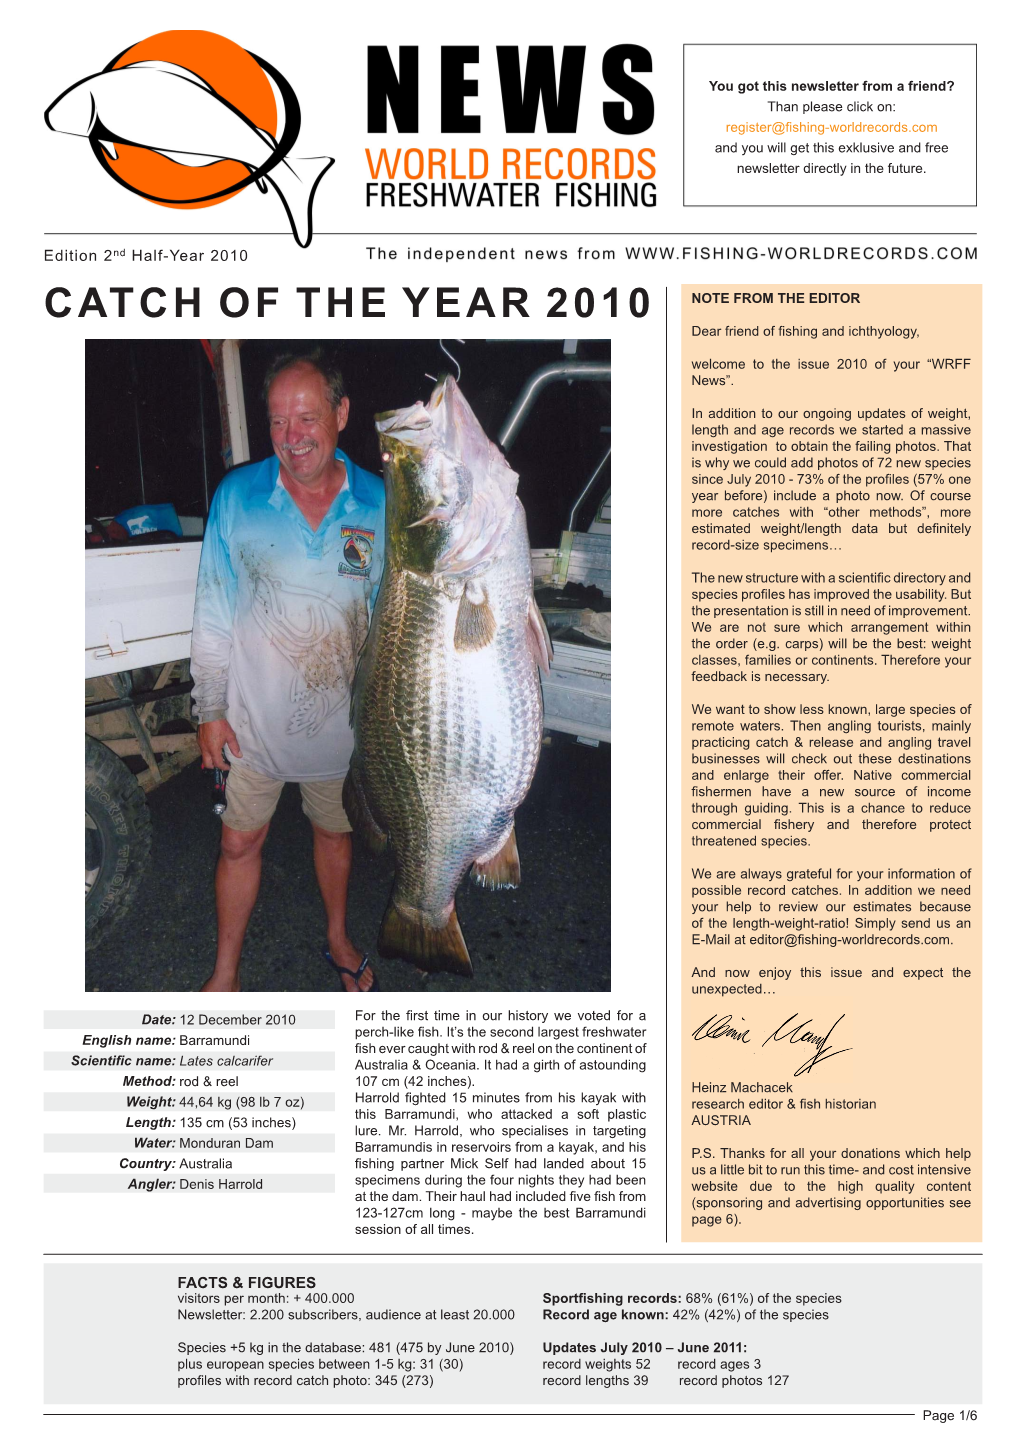 CATCH of the YEAR 2010 NOTE from the EDITOR Dear Friend of Fishing and Ichthyology